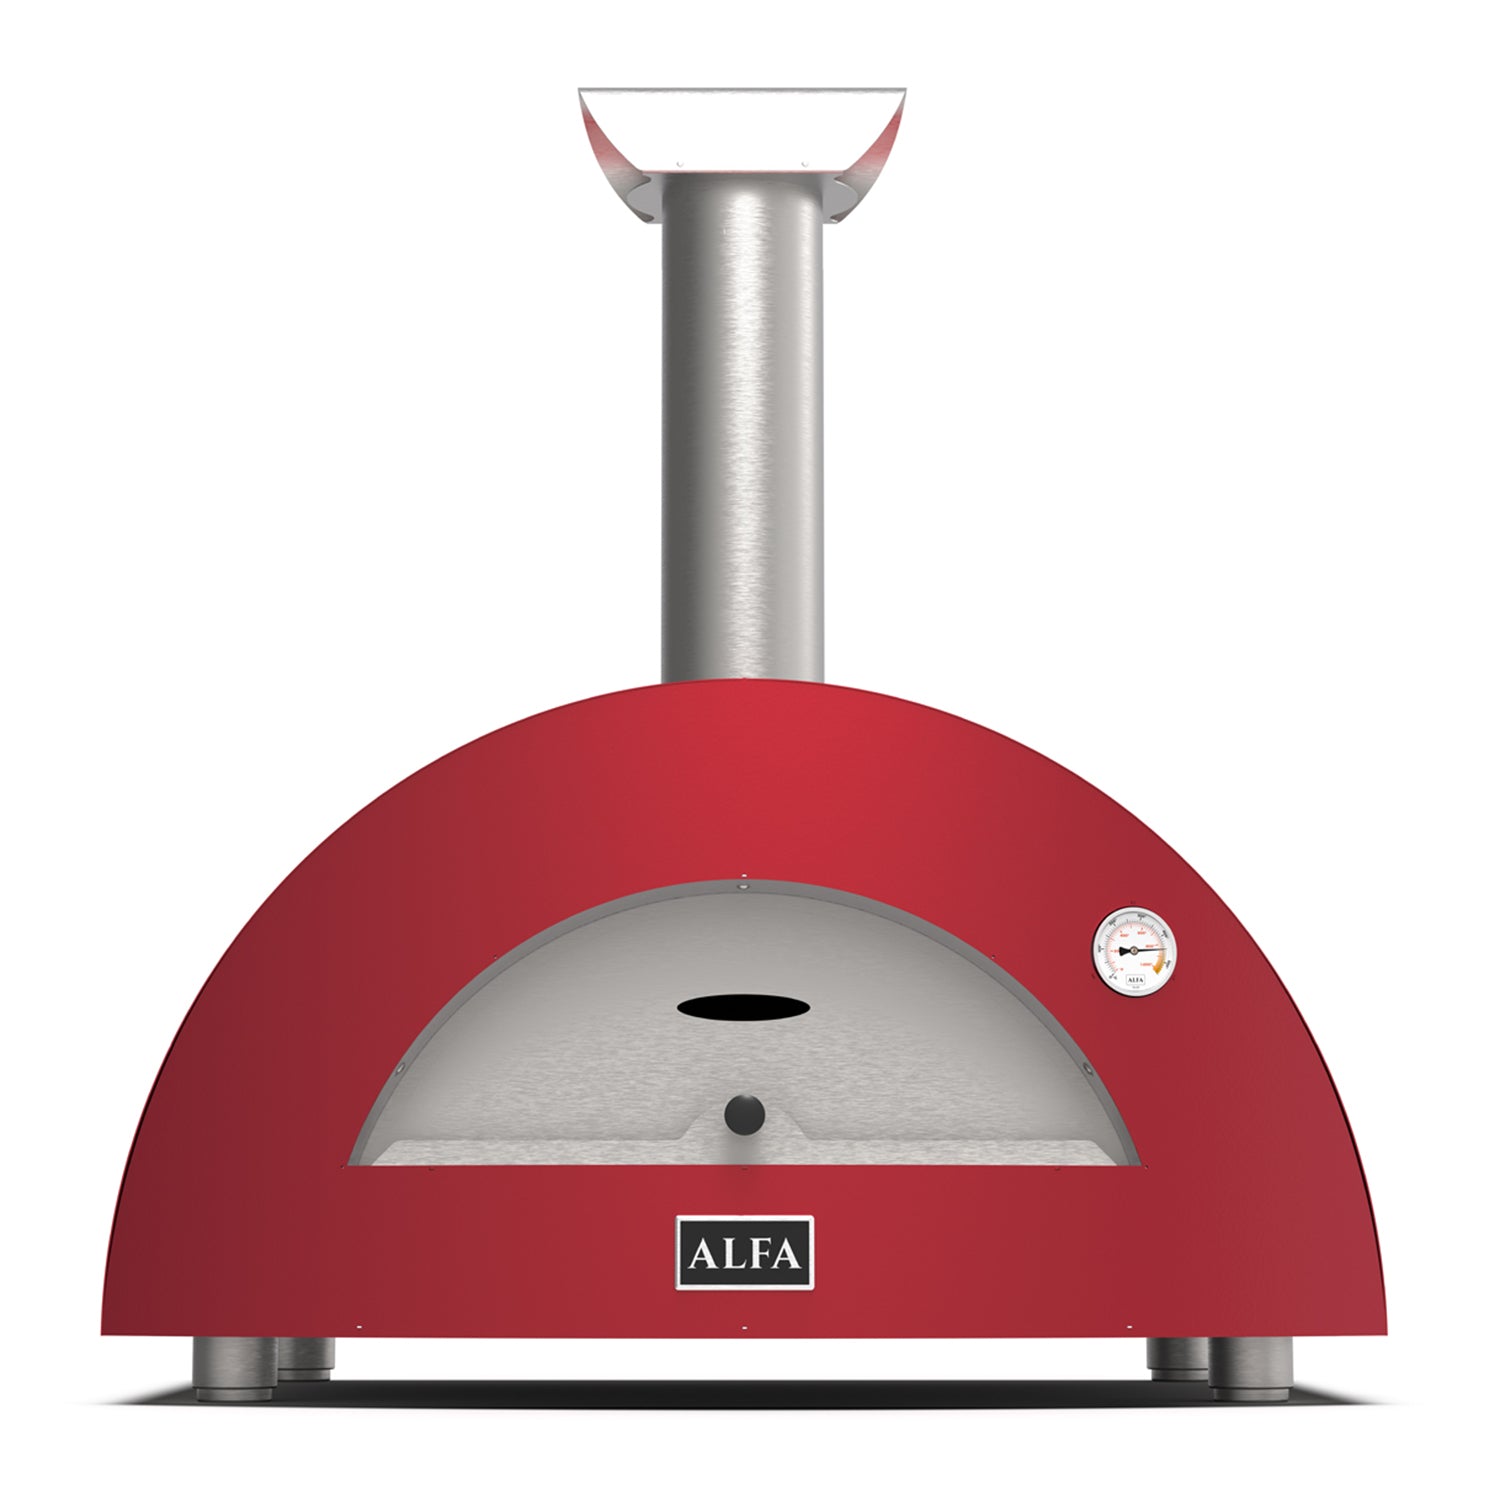 Alfa Moderno 2 Pizze Gas Pizza Oven - Antique Red - FXMD-2P-GROA-U